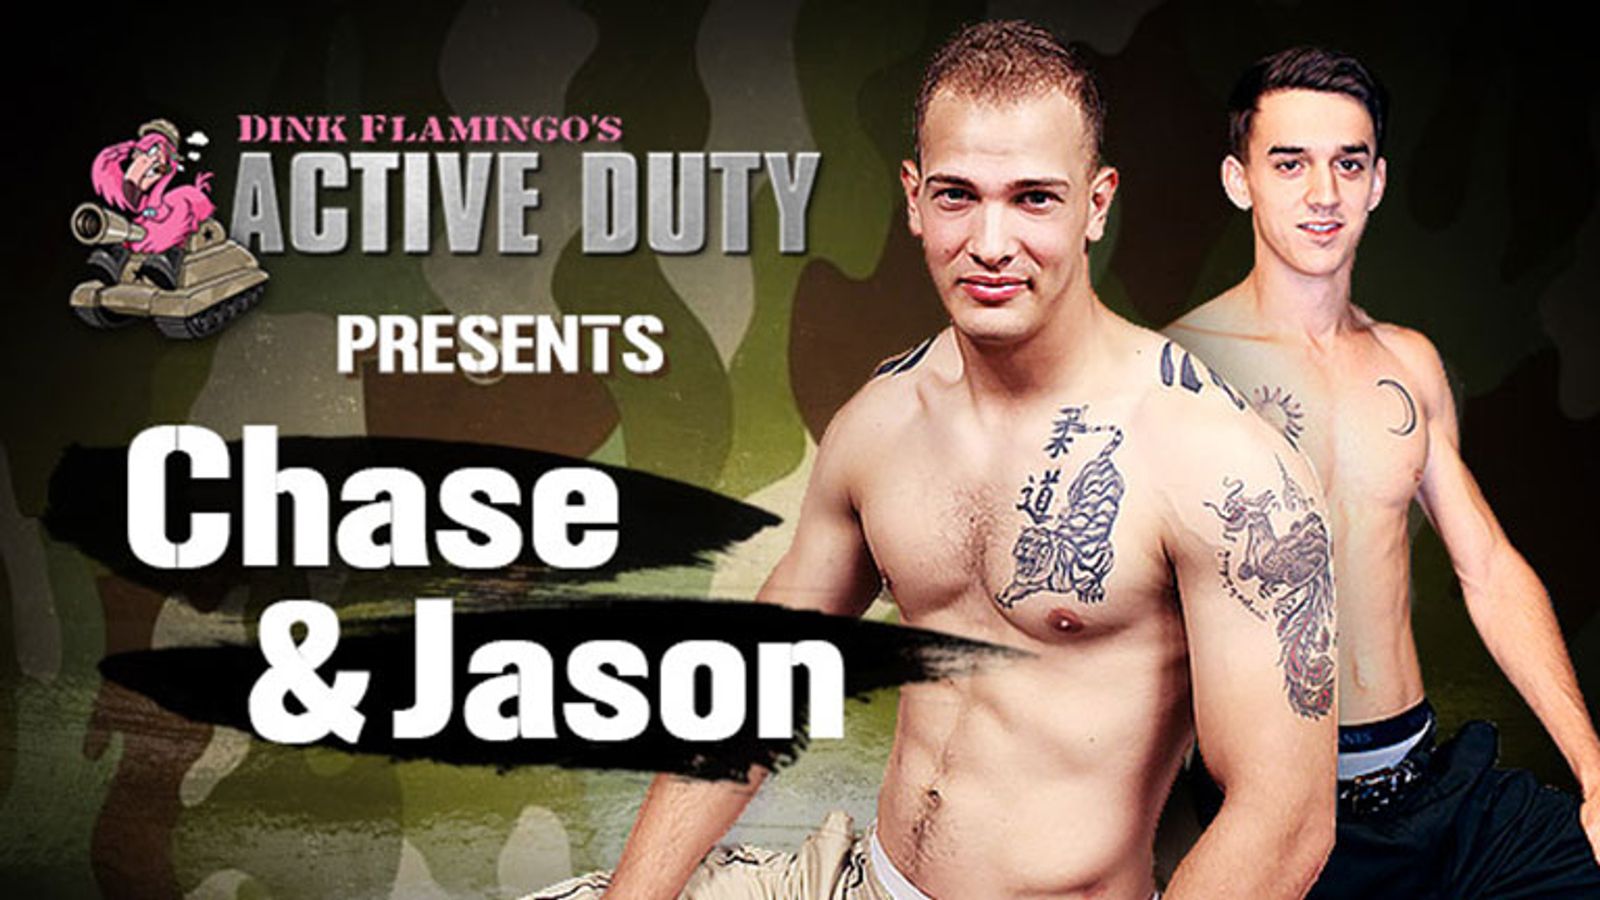 Active Duty to Post Its Latest Scene, 'Chase & Jason'